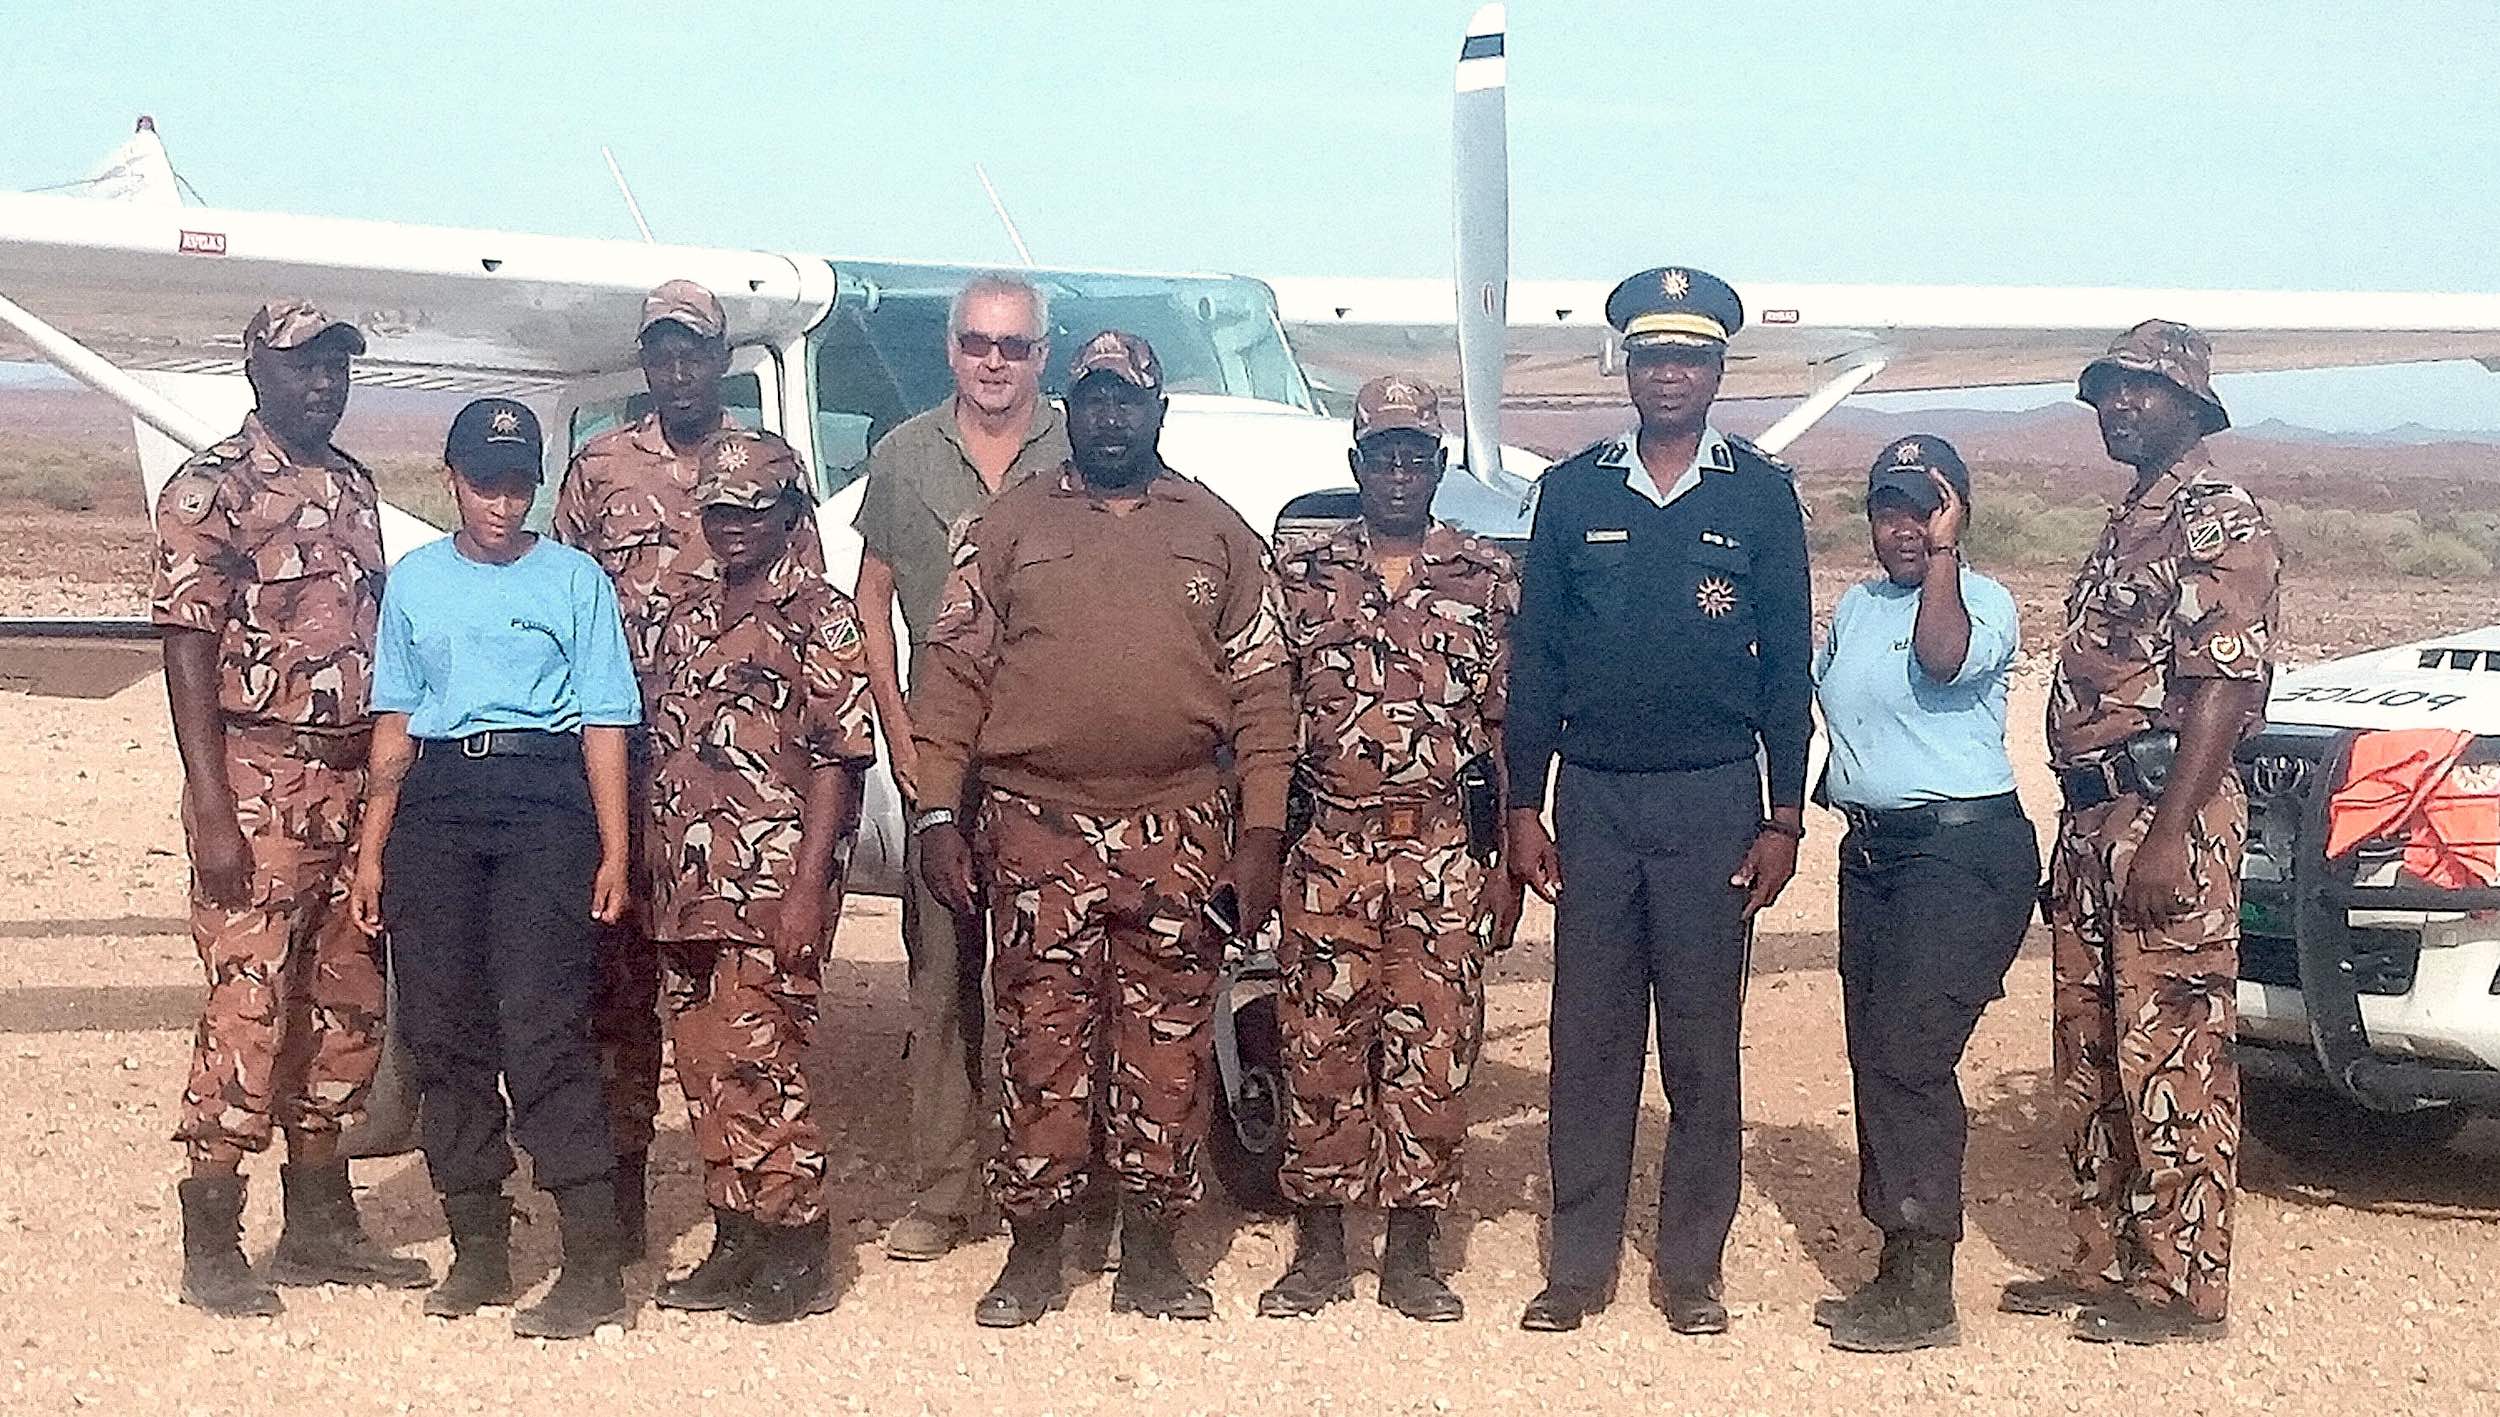 A group of eight people in uniform stand in front of a police vehicle and a light aircraft.